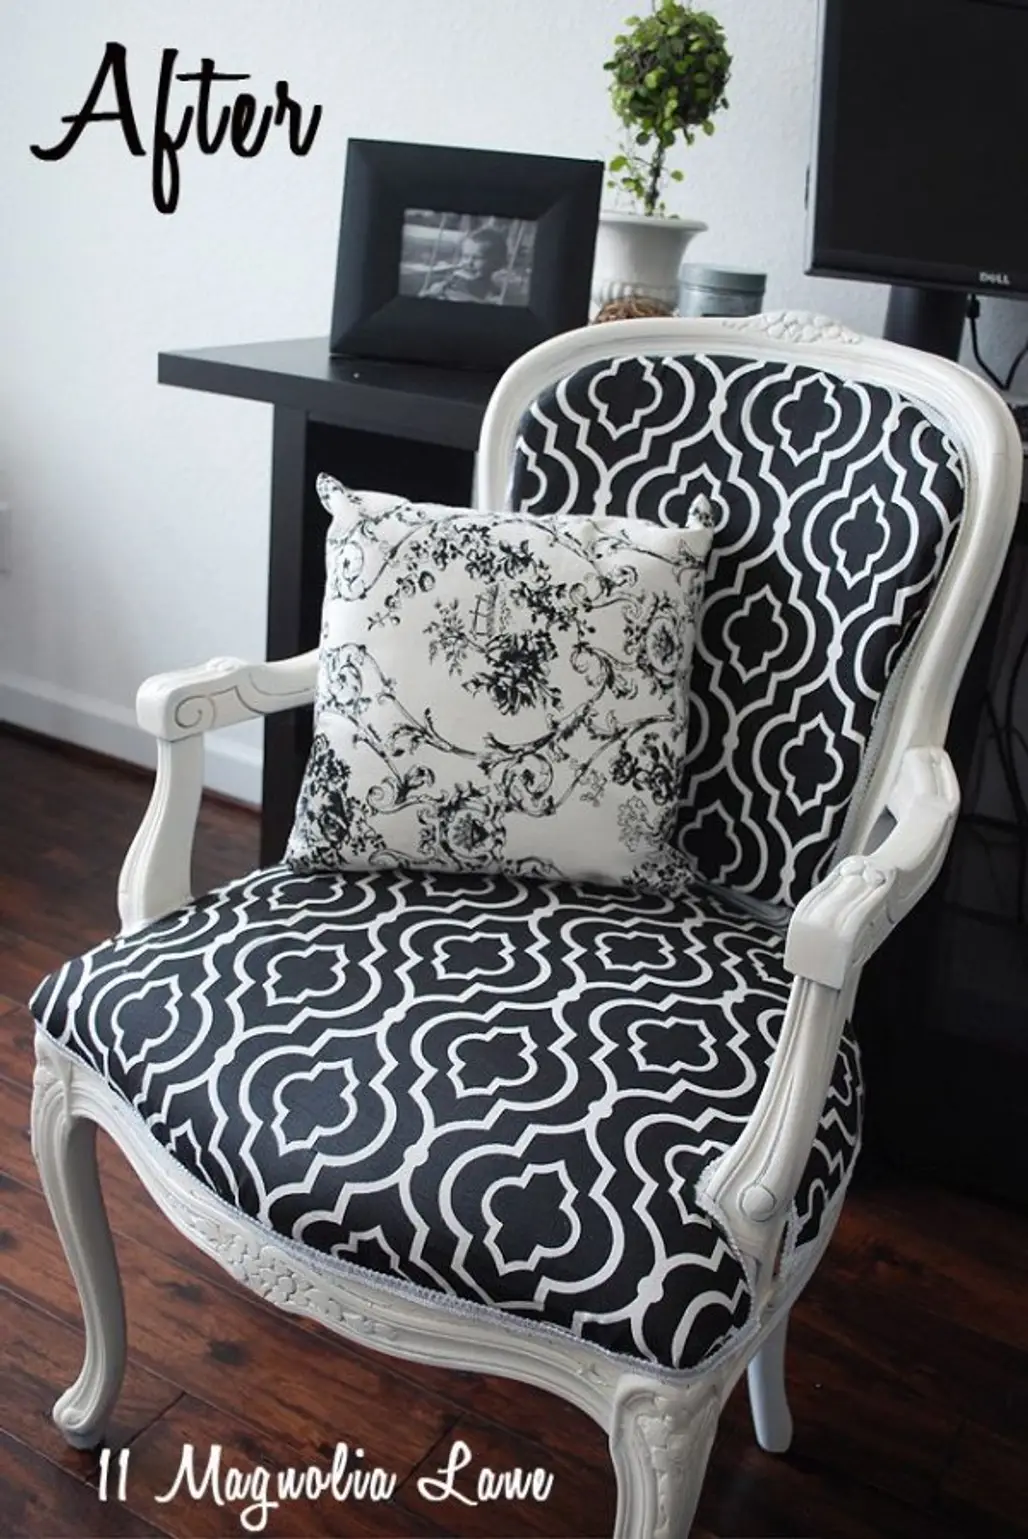 Chair Reupholstered in Black and White